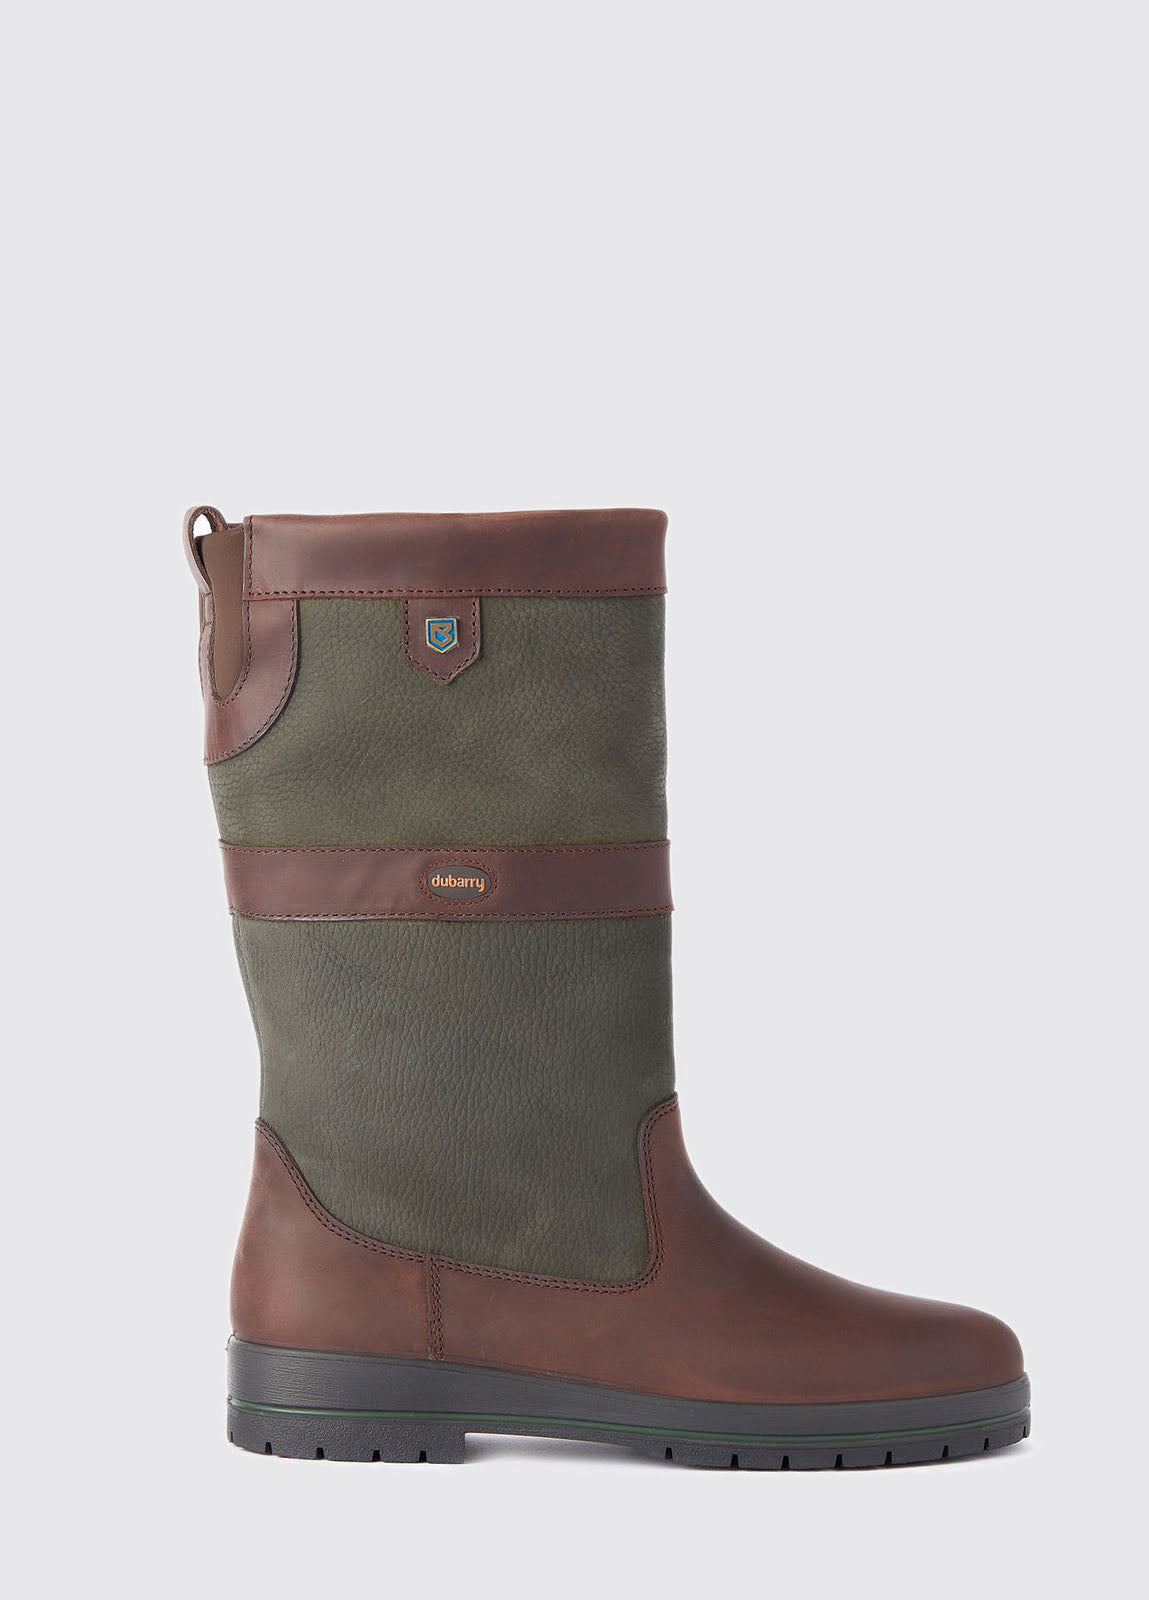 Dubarry Womens Kildare Country Boot - Ivy